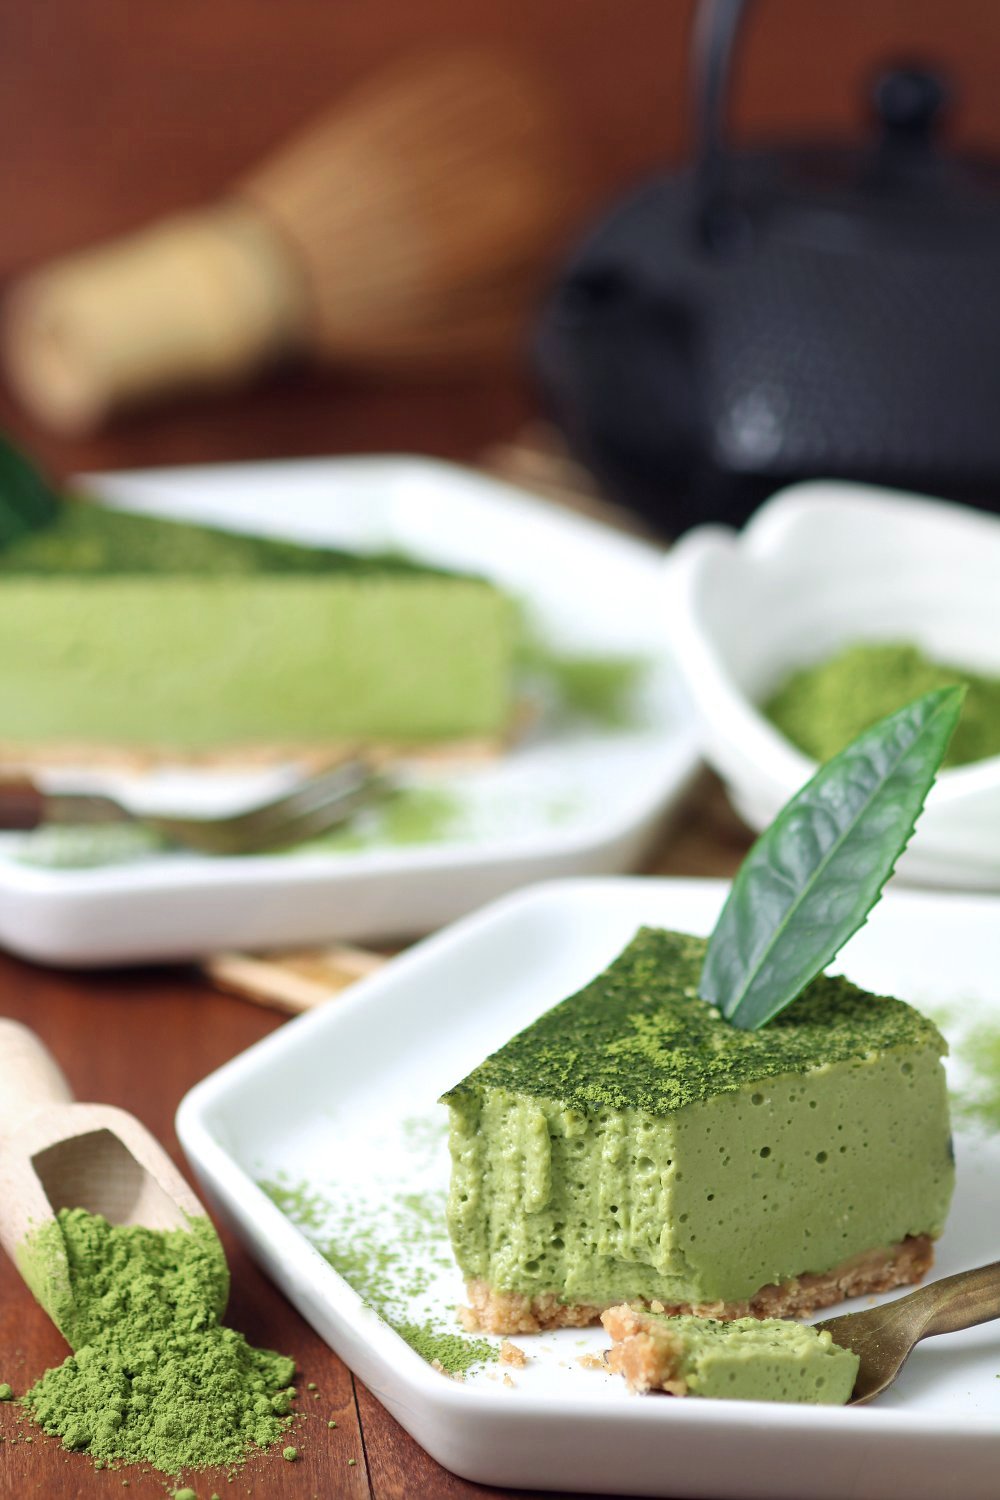 A creamy Vegan Matcha Mousse Cake with an airy, whipped texture flavored with the complex taste of Japanese matcha green tea powder.